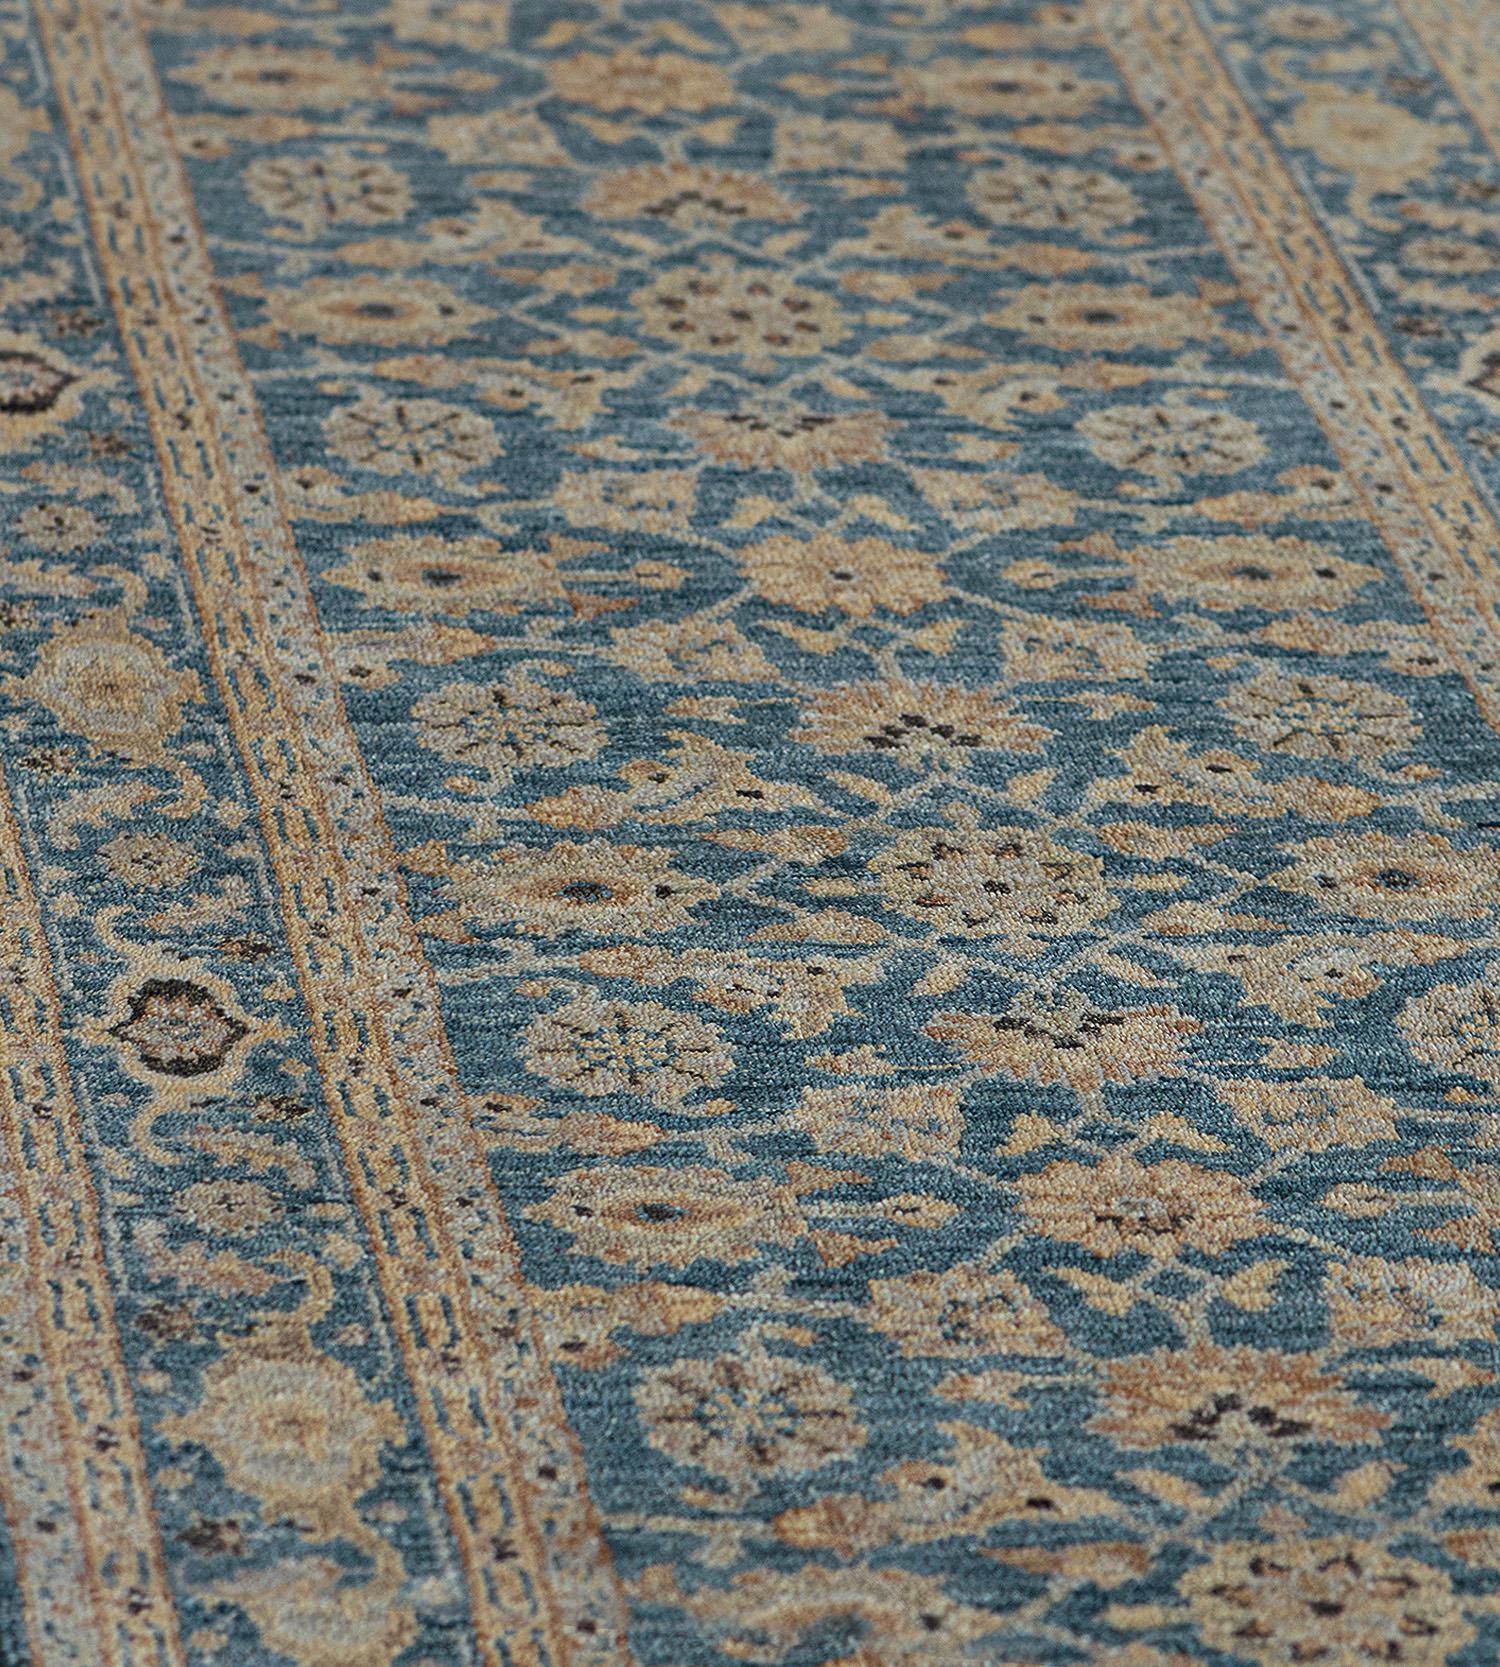 The light blue field with an overall design of dense sandy-yellow and mole-brown herati-pattern, in a light blue border of ivory and mole-brown and turtle-palmette vine border between narrow ivory floral vine stripes.